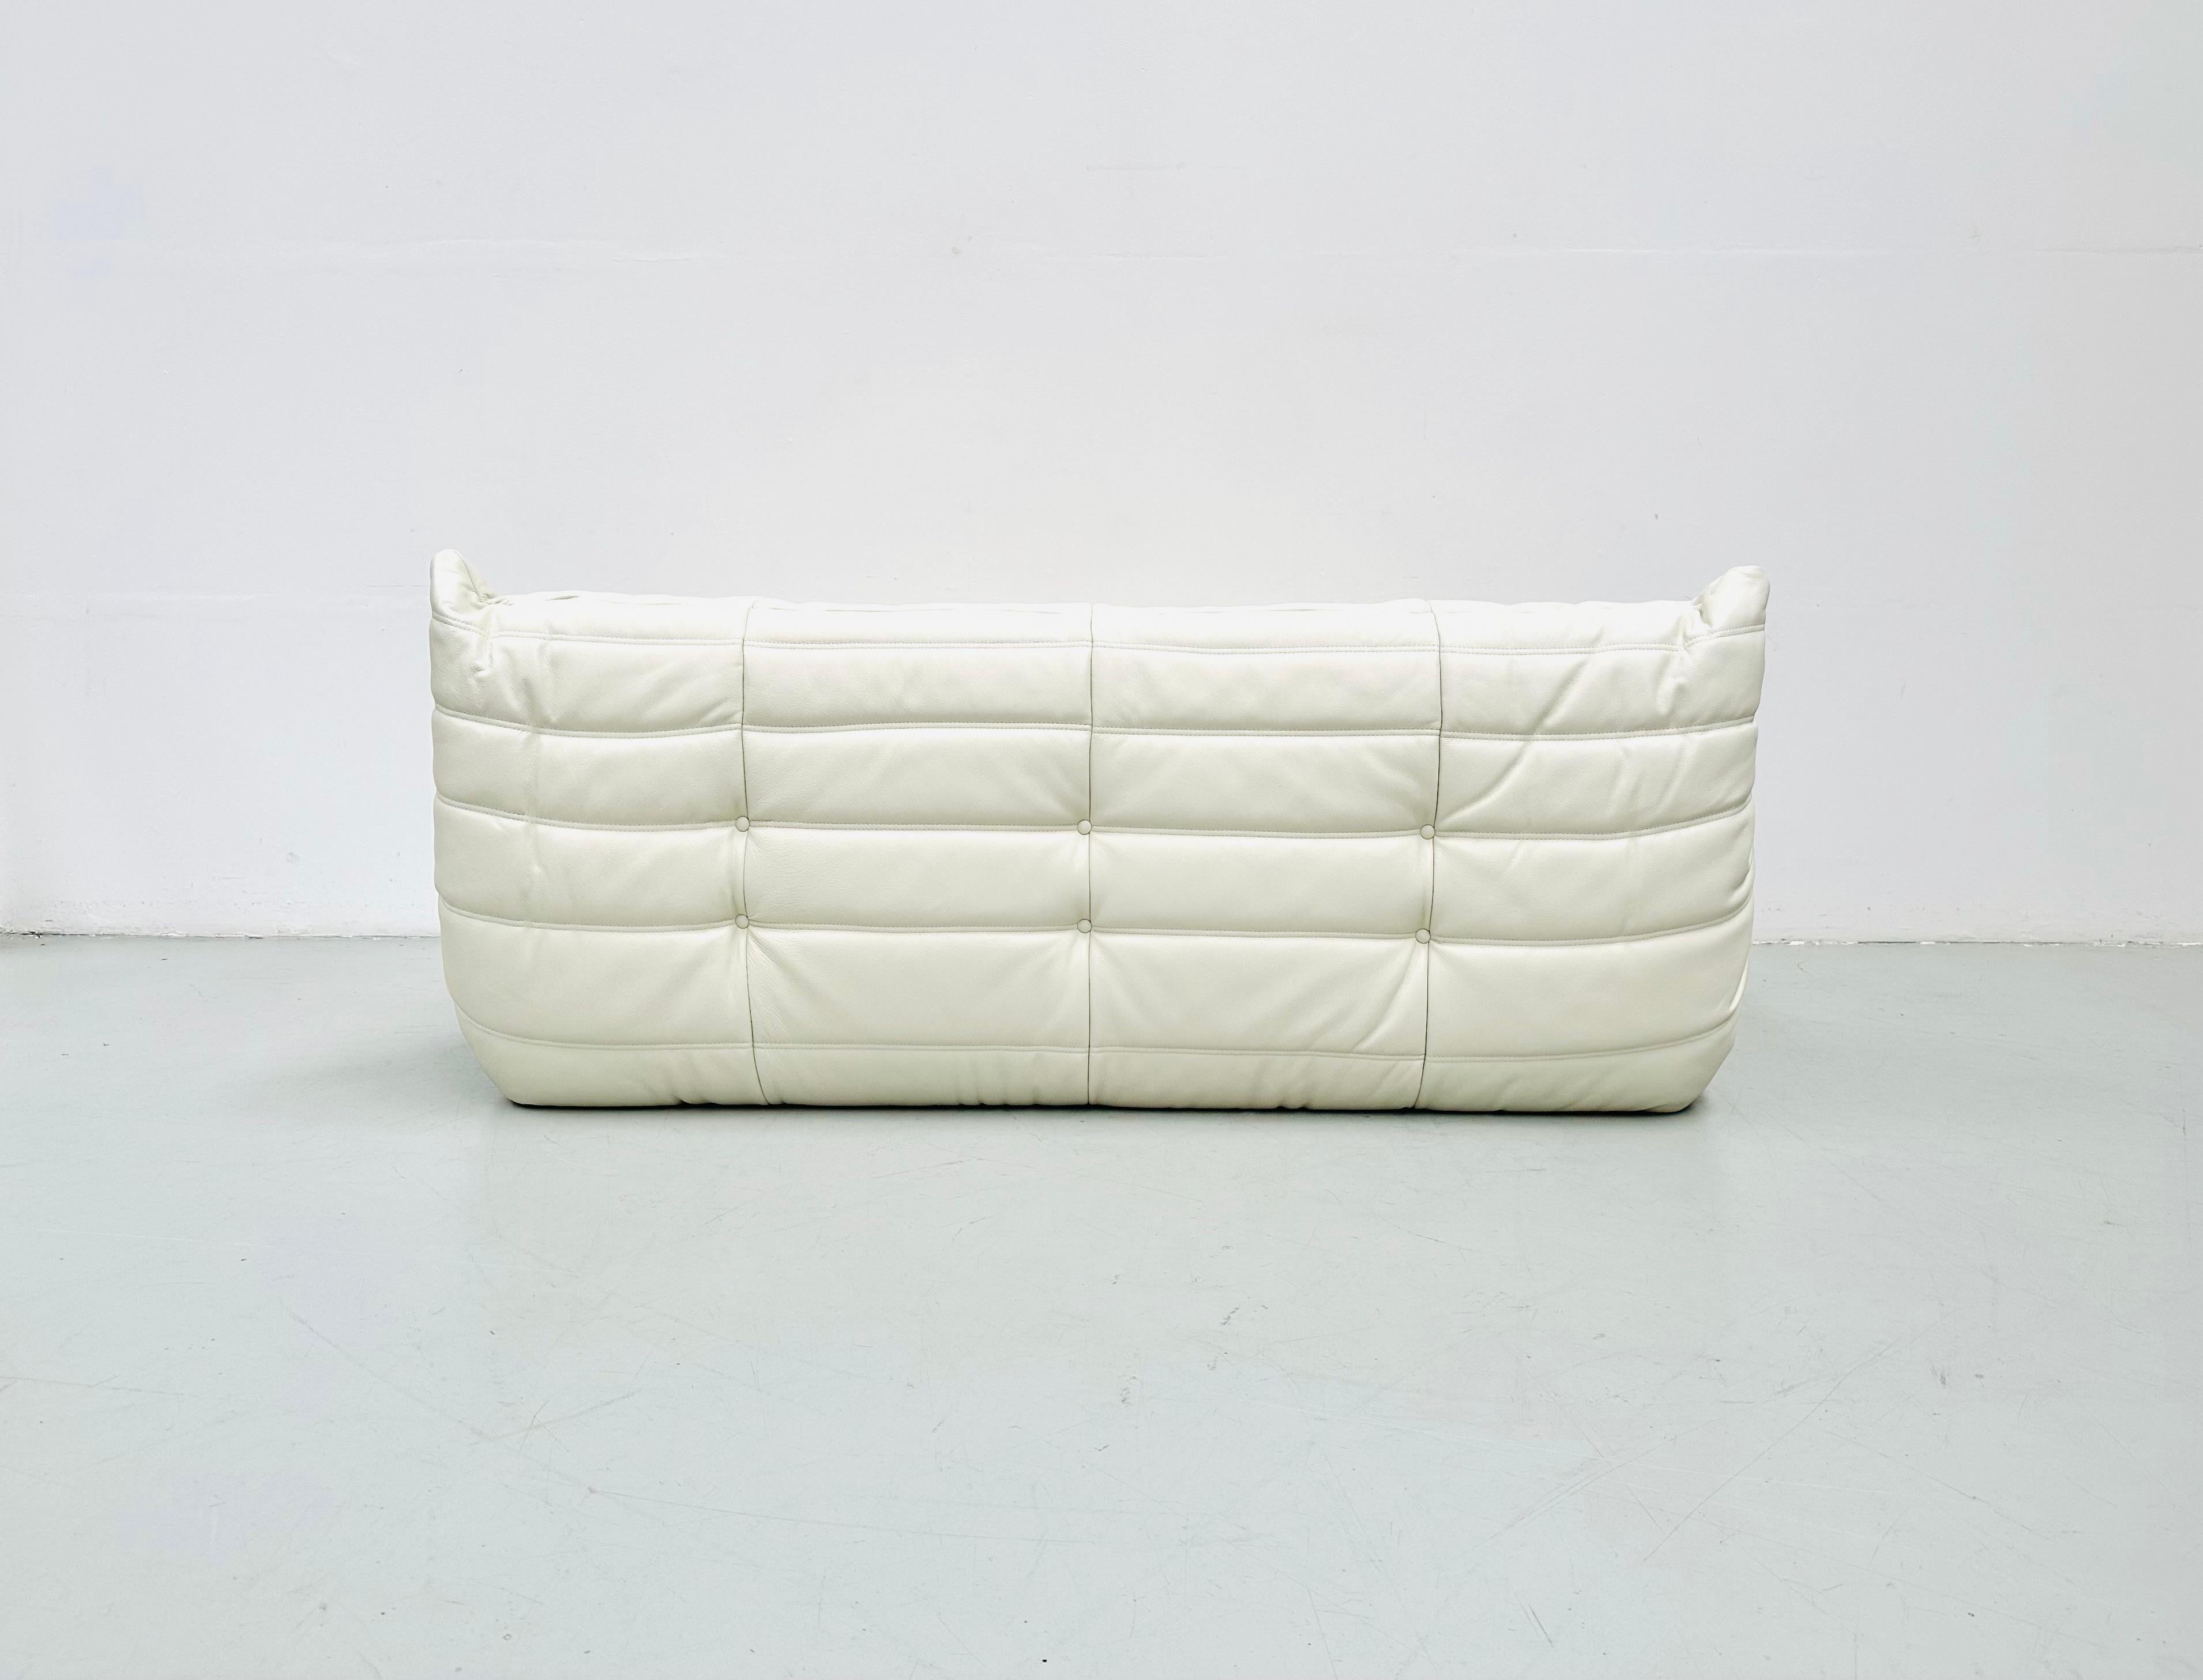 French Togo Sofa in White Leather by Michel Ducaroy for Ligne Roset. 3